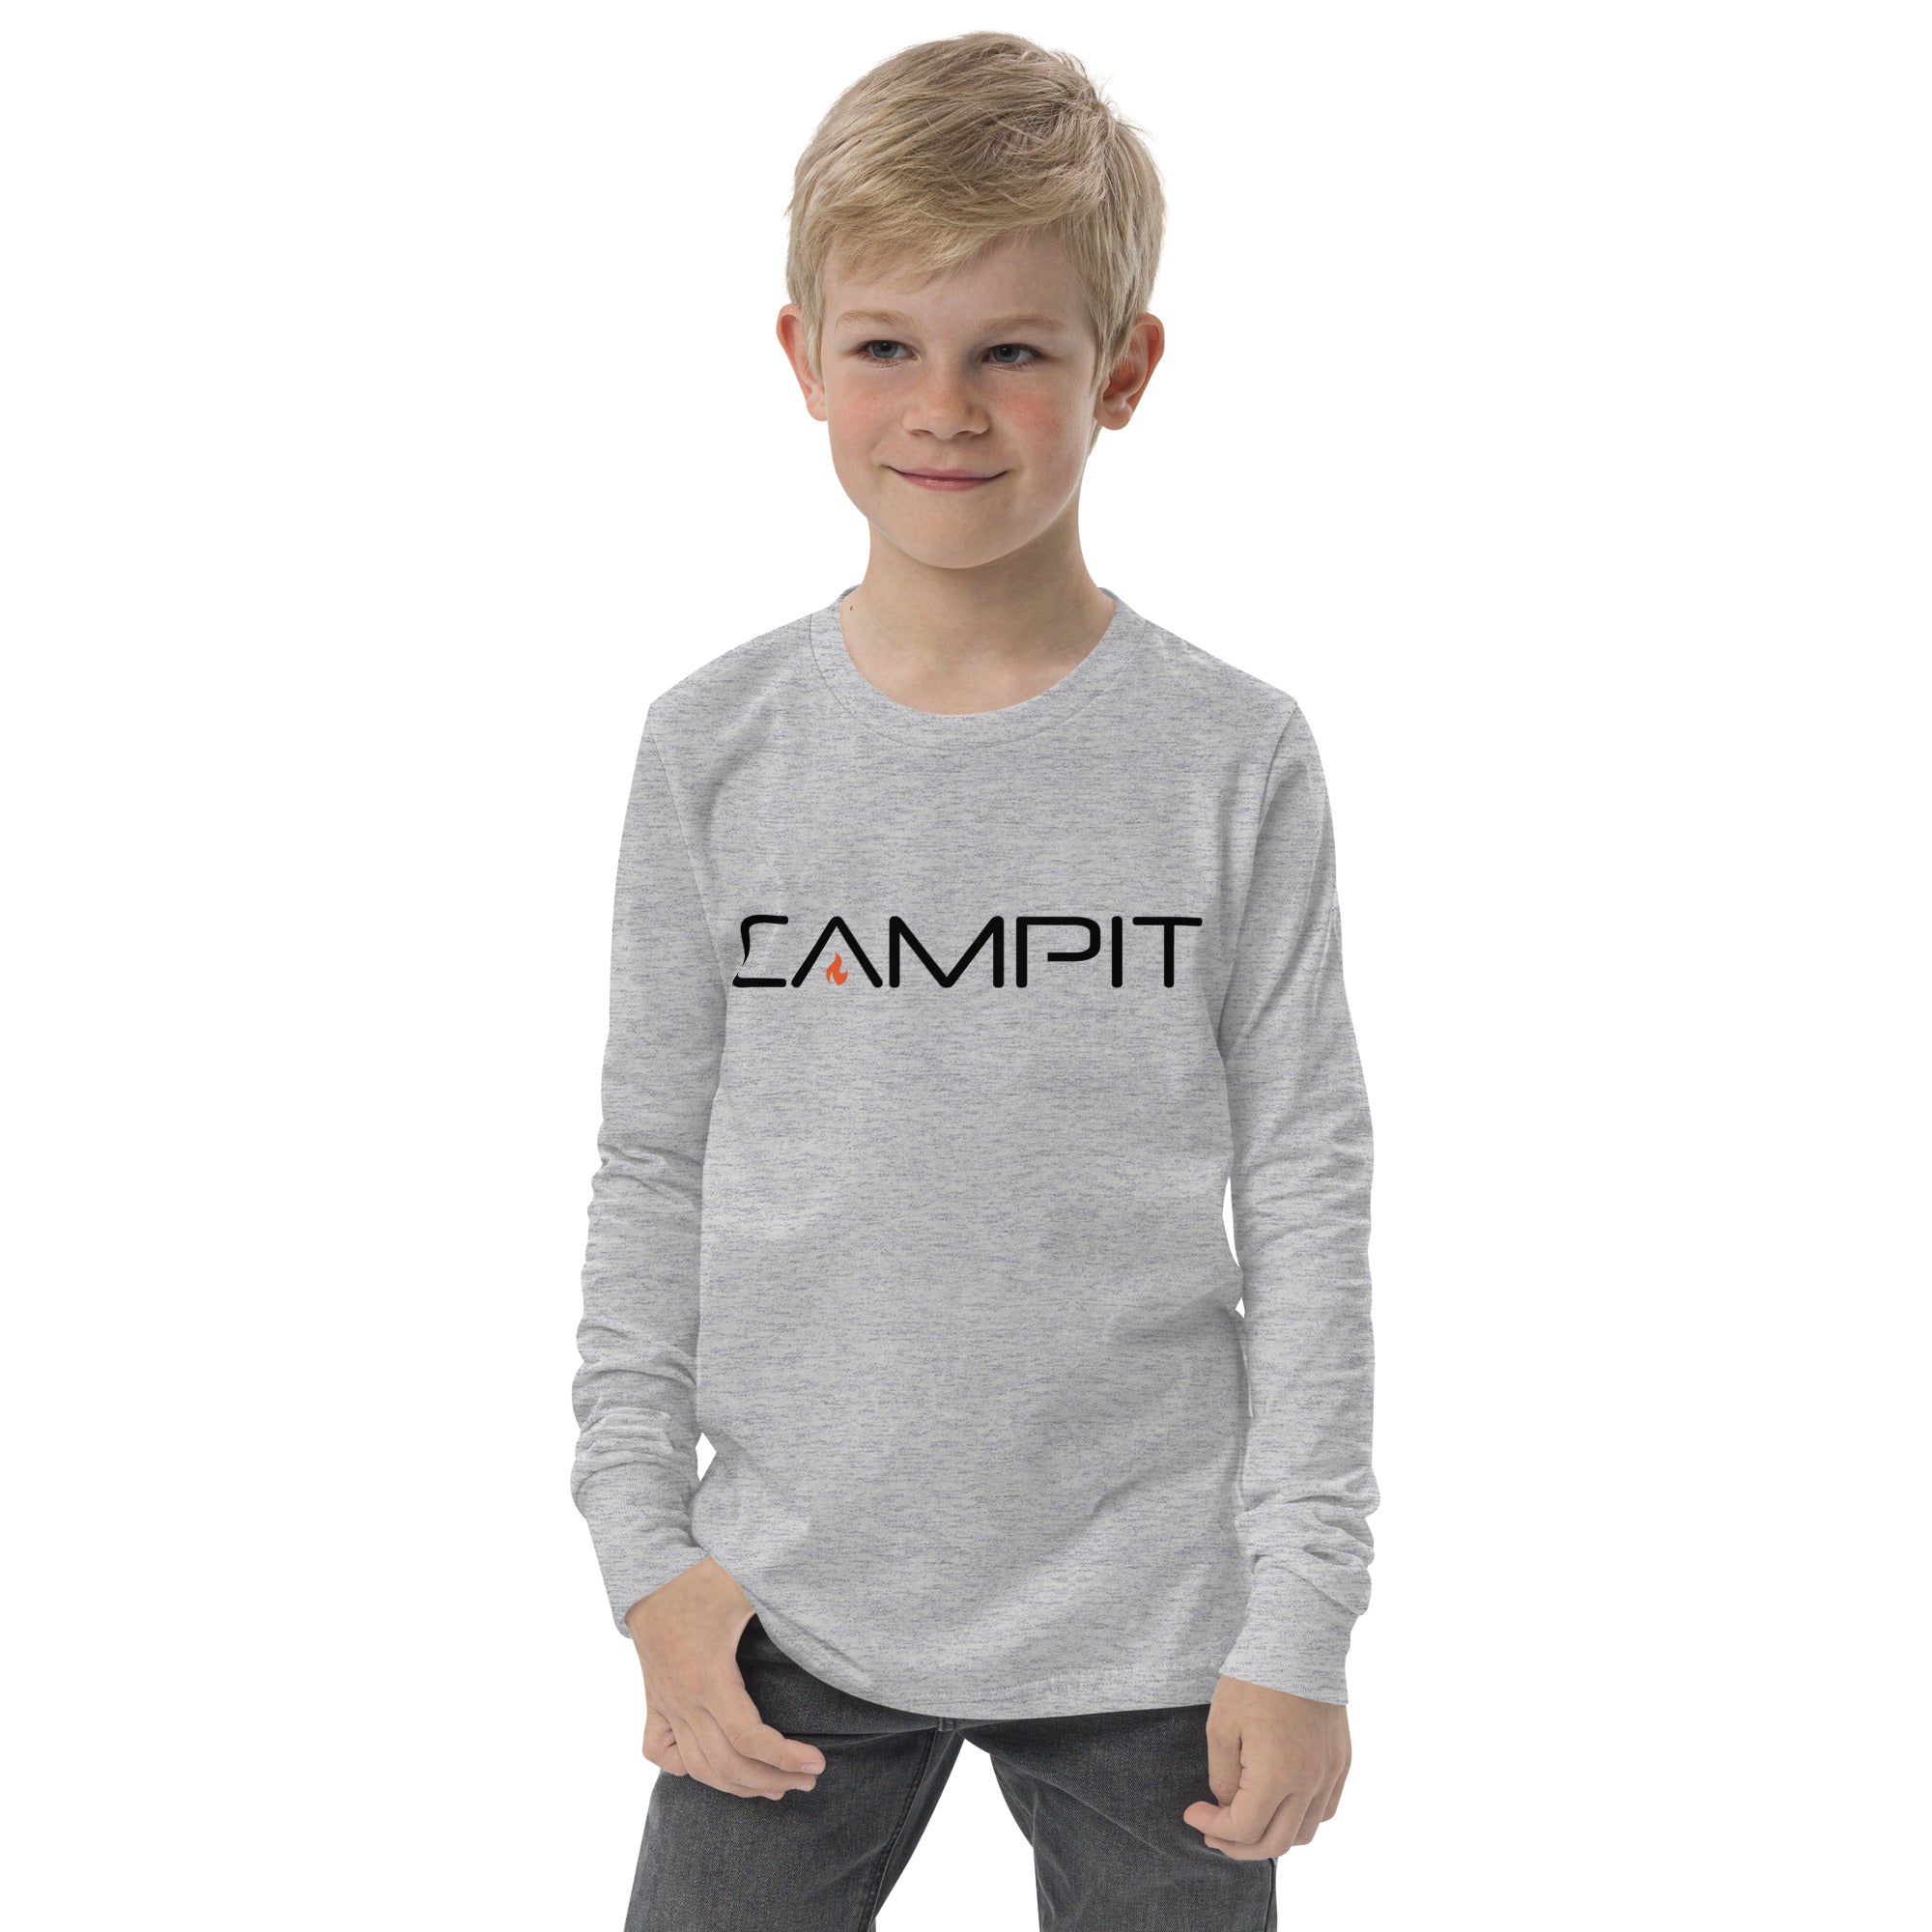 Youth Long Sleeve T-shirt with Vintage Flame Logo